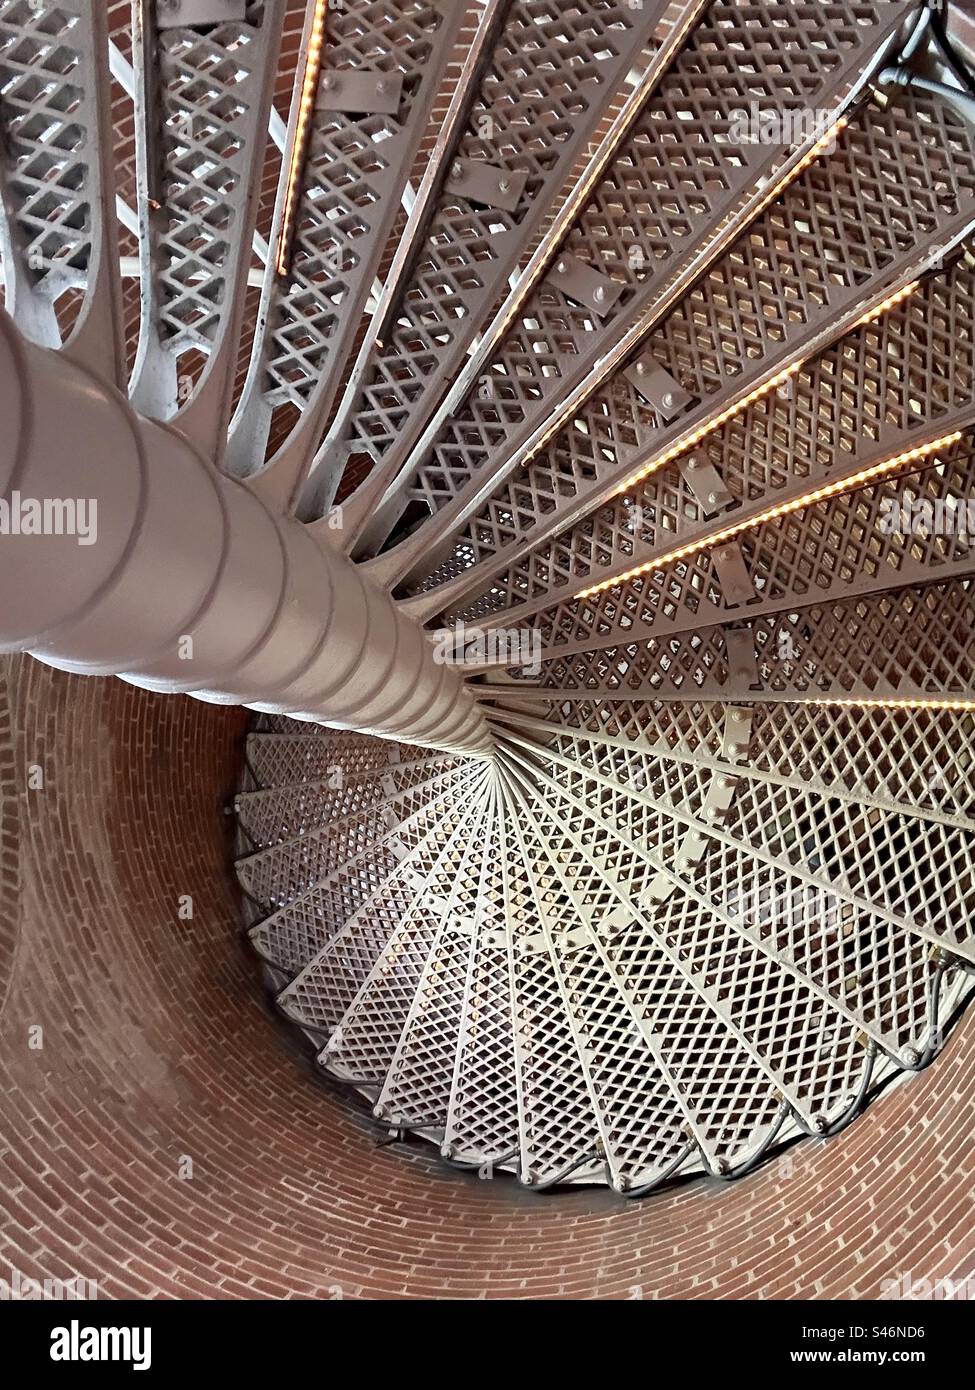 The interior spiral staircase of a Cape May light house Stock Photo